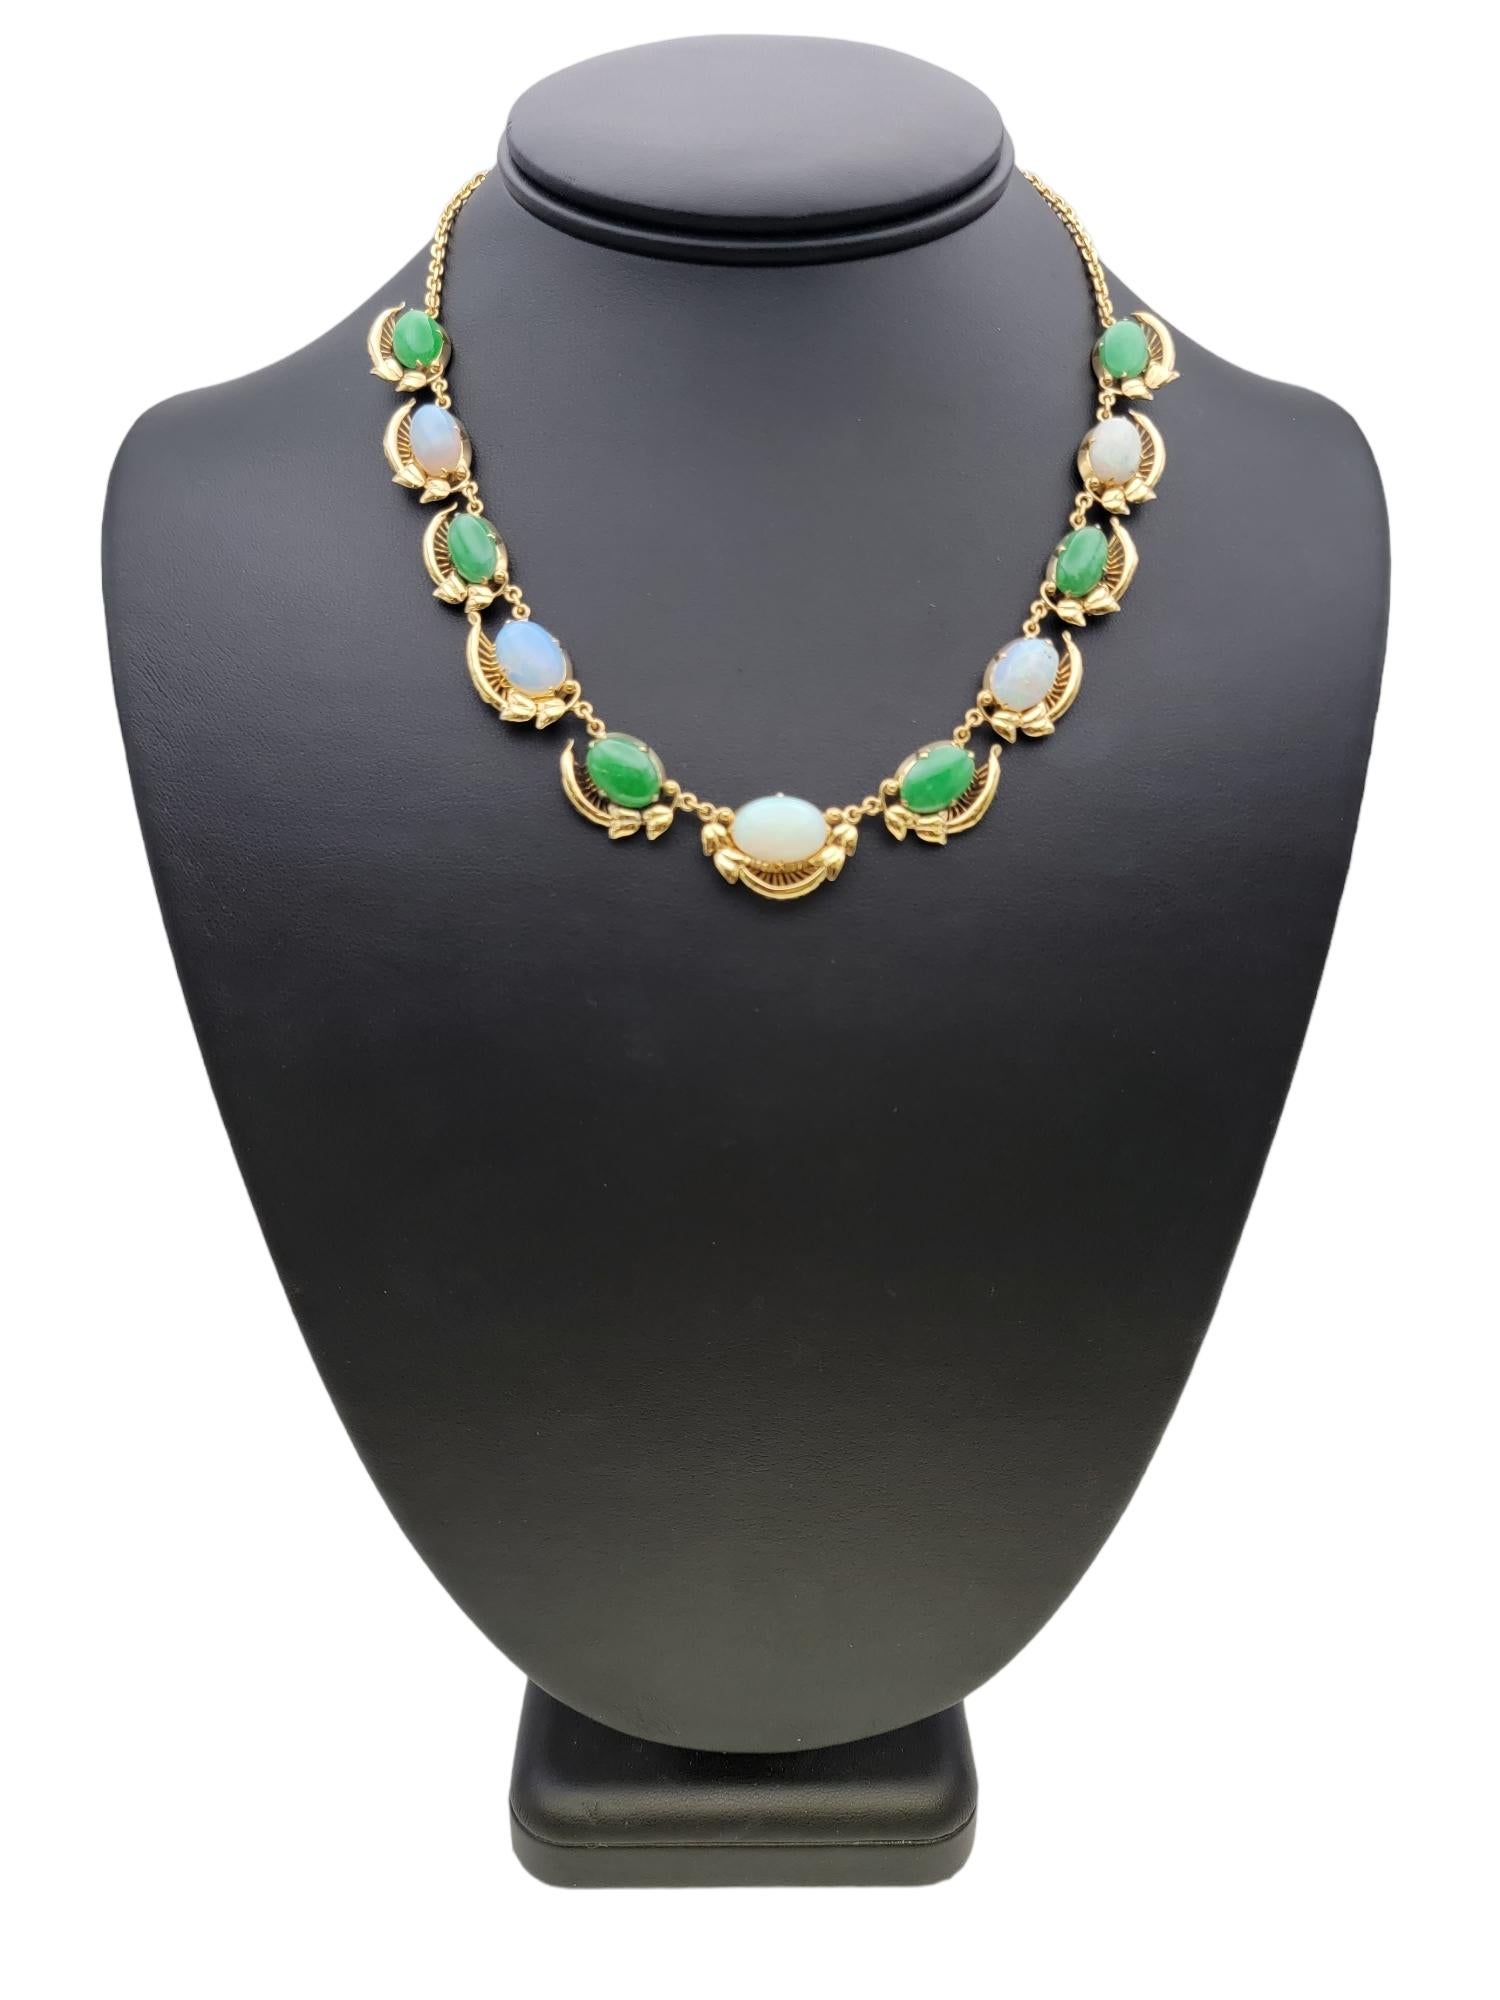 Graduated Oval Cabochon Jade and Opal Choker Necklace in Polished Yellow Gold For Sale 7